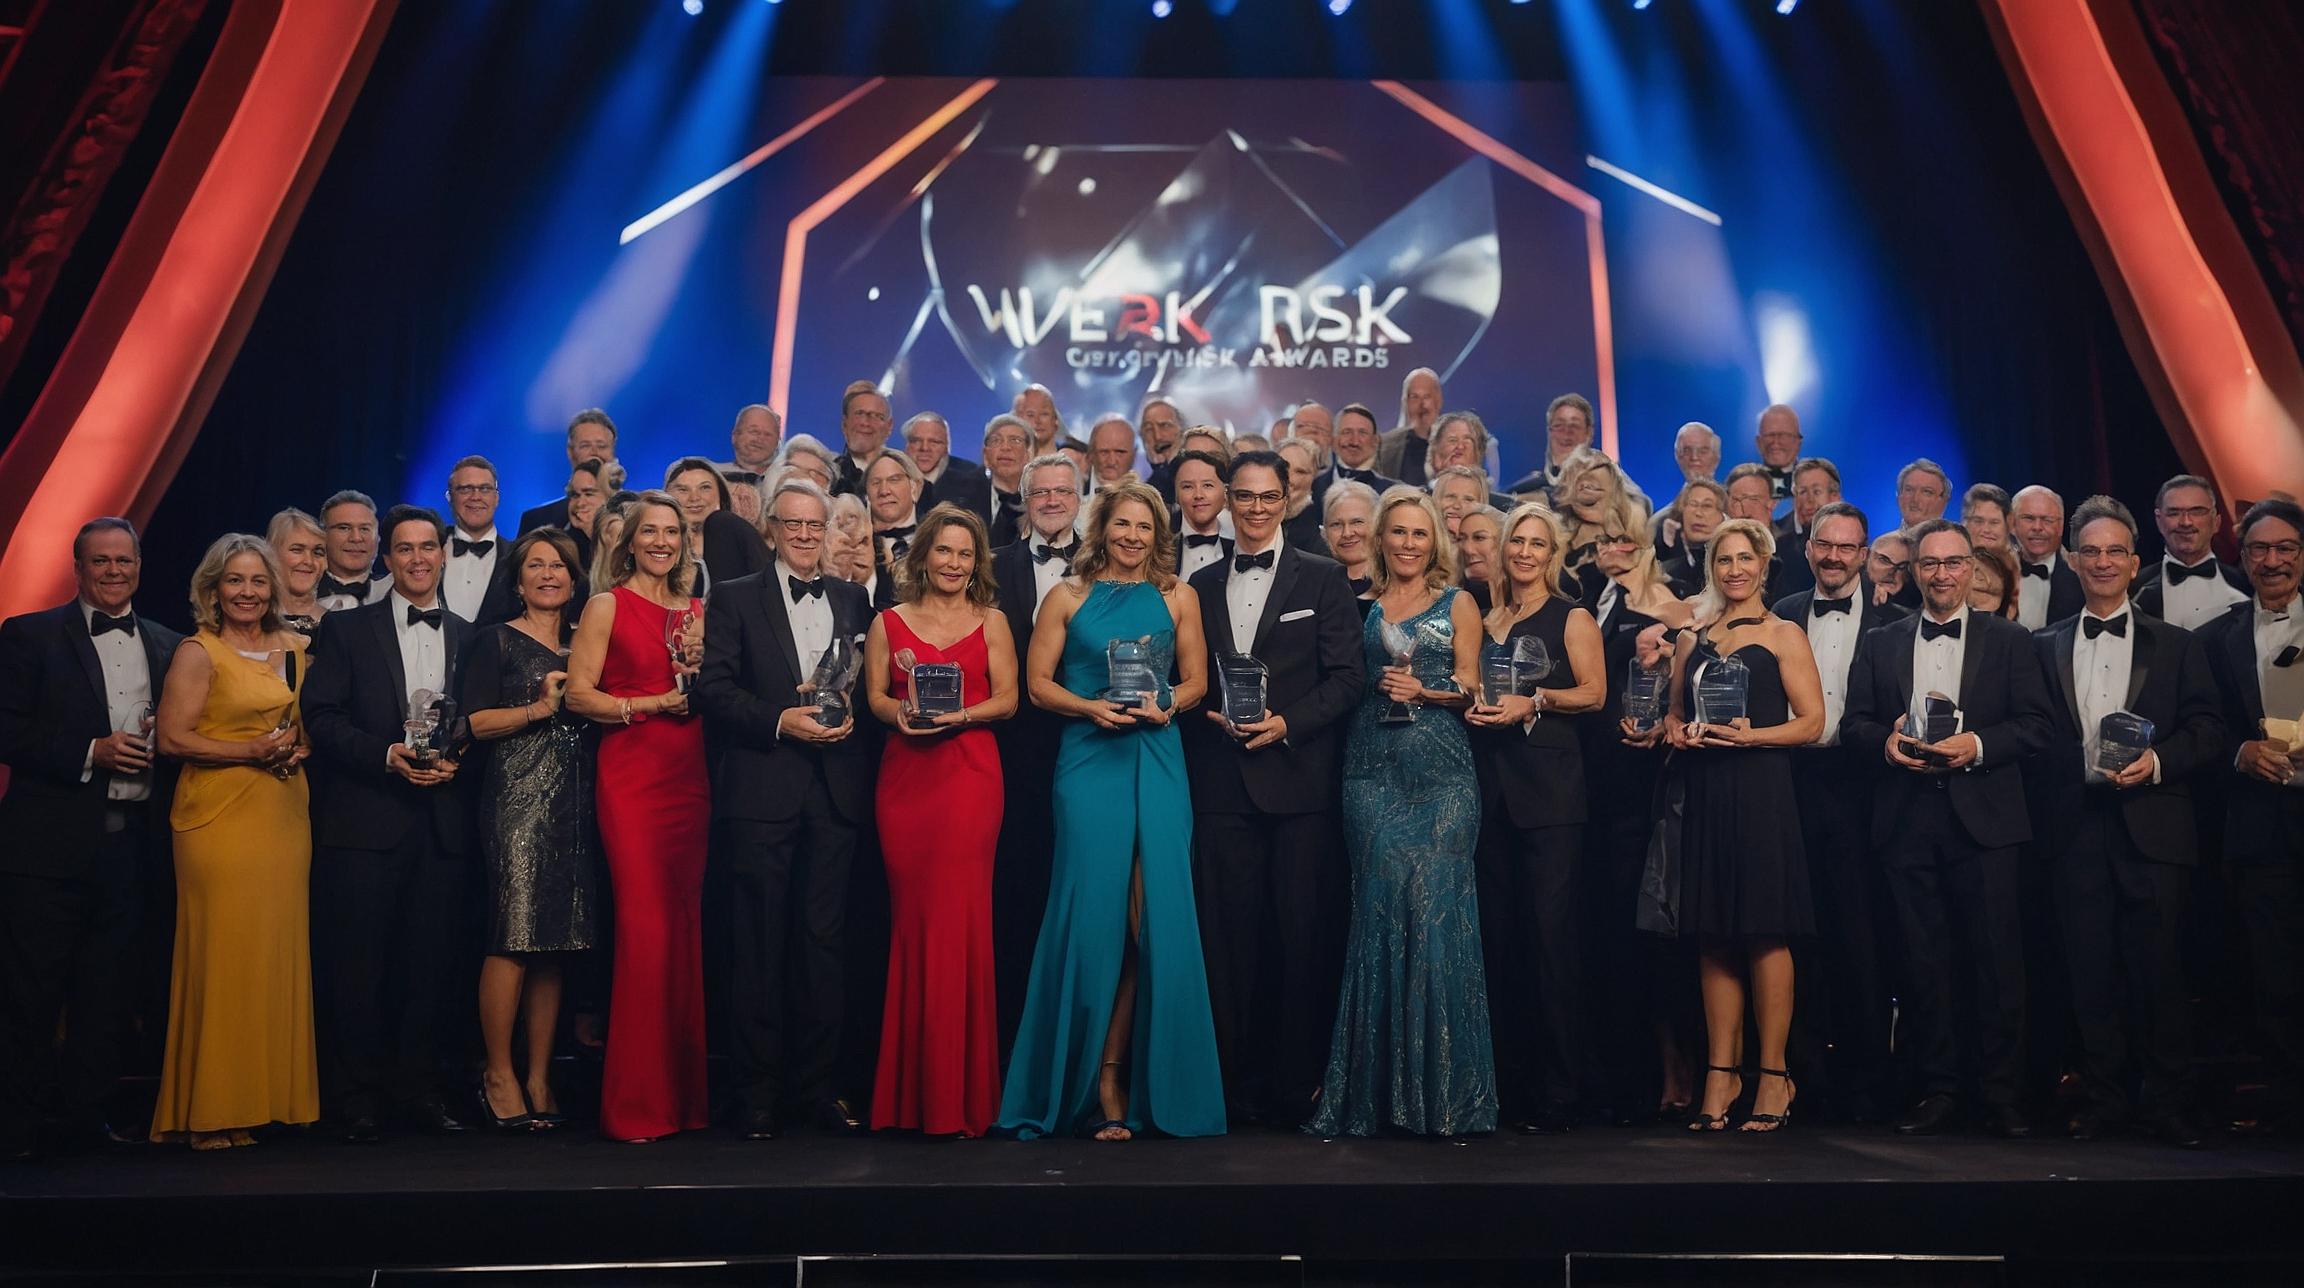 Mullen Coughlin Wins Big at Zywave Cyber Risk Awards | FinOracle